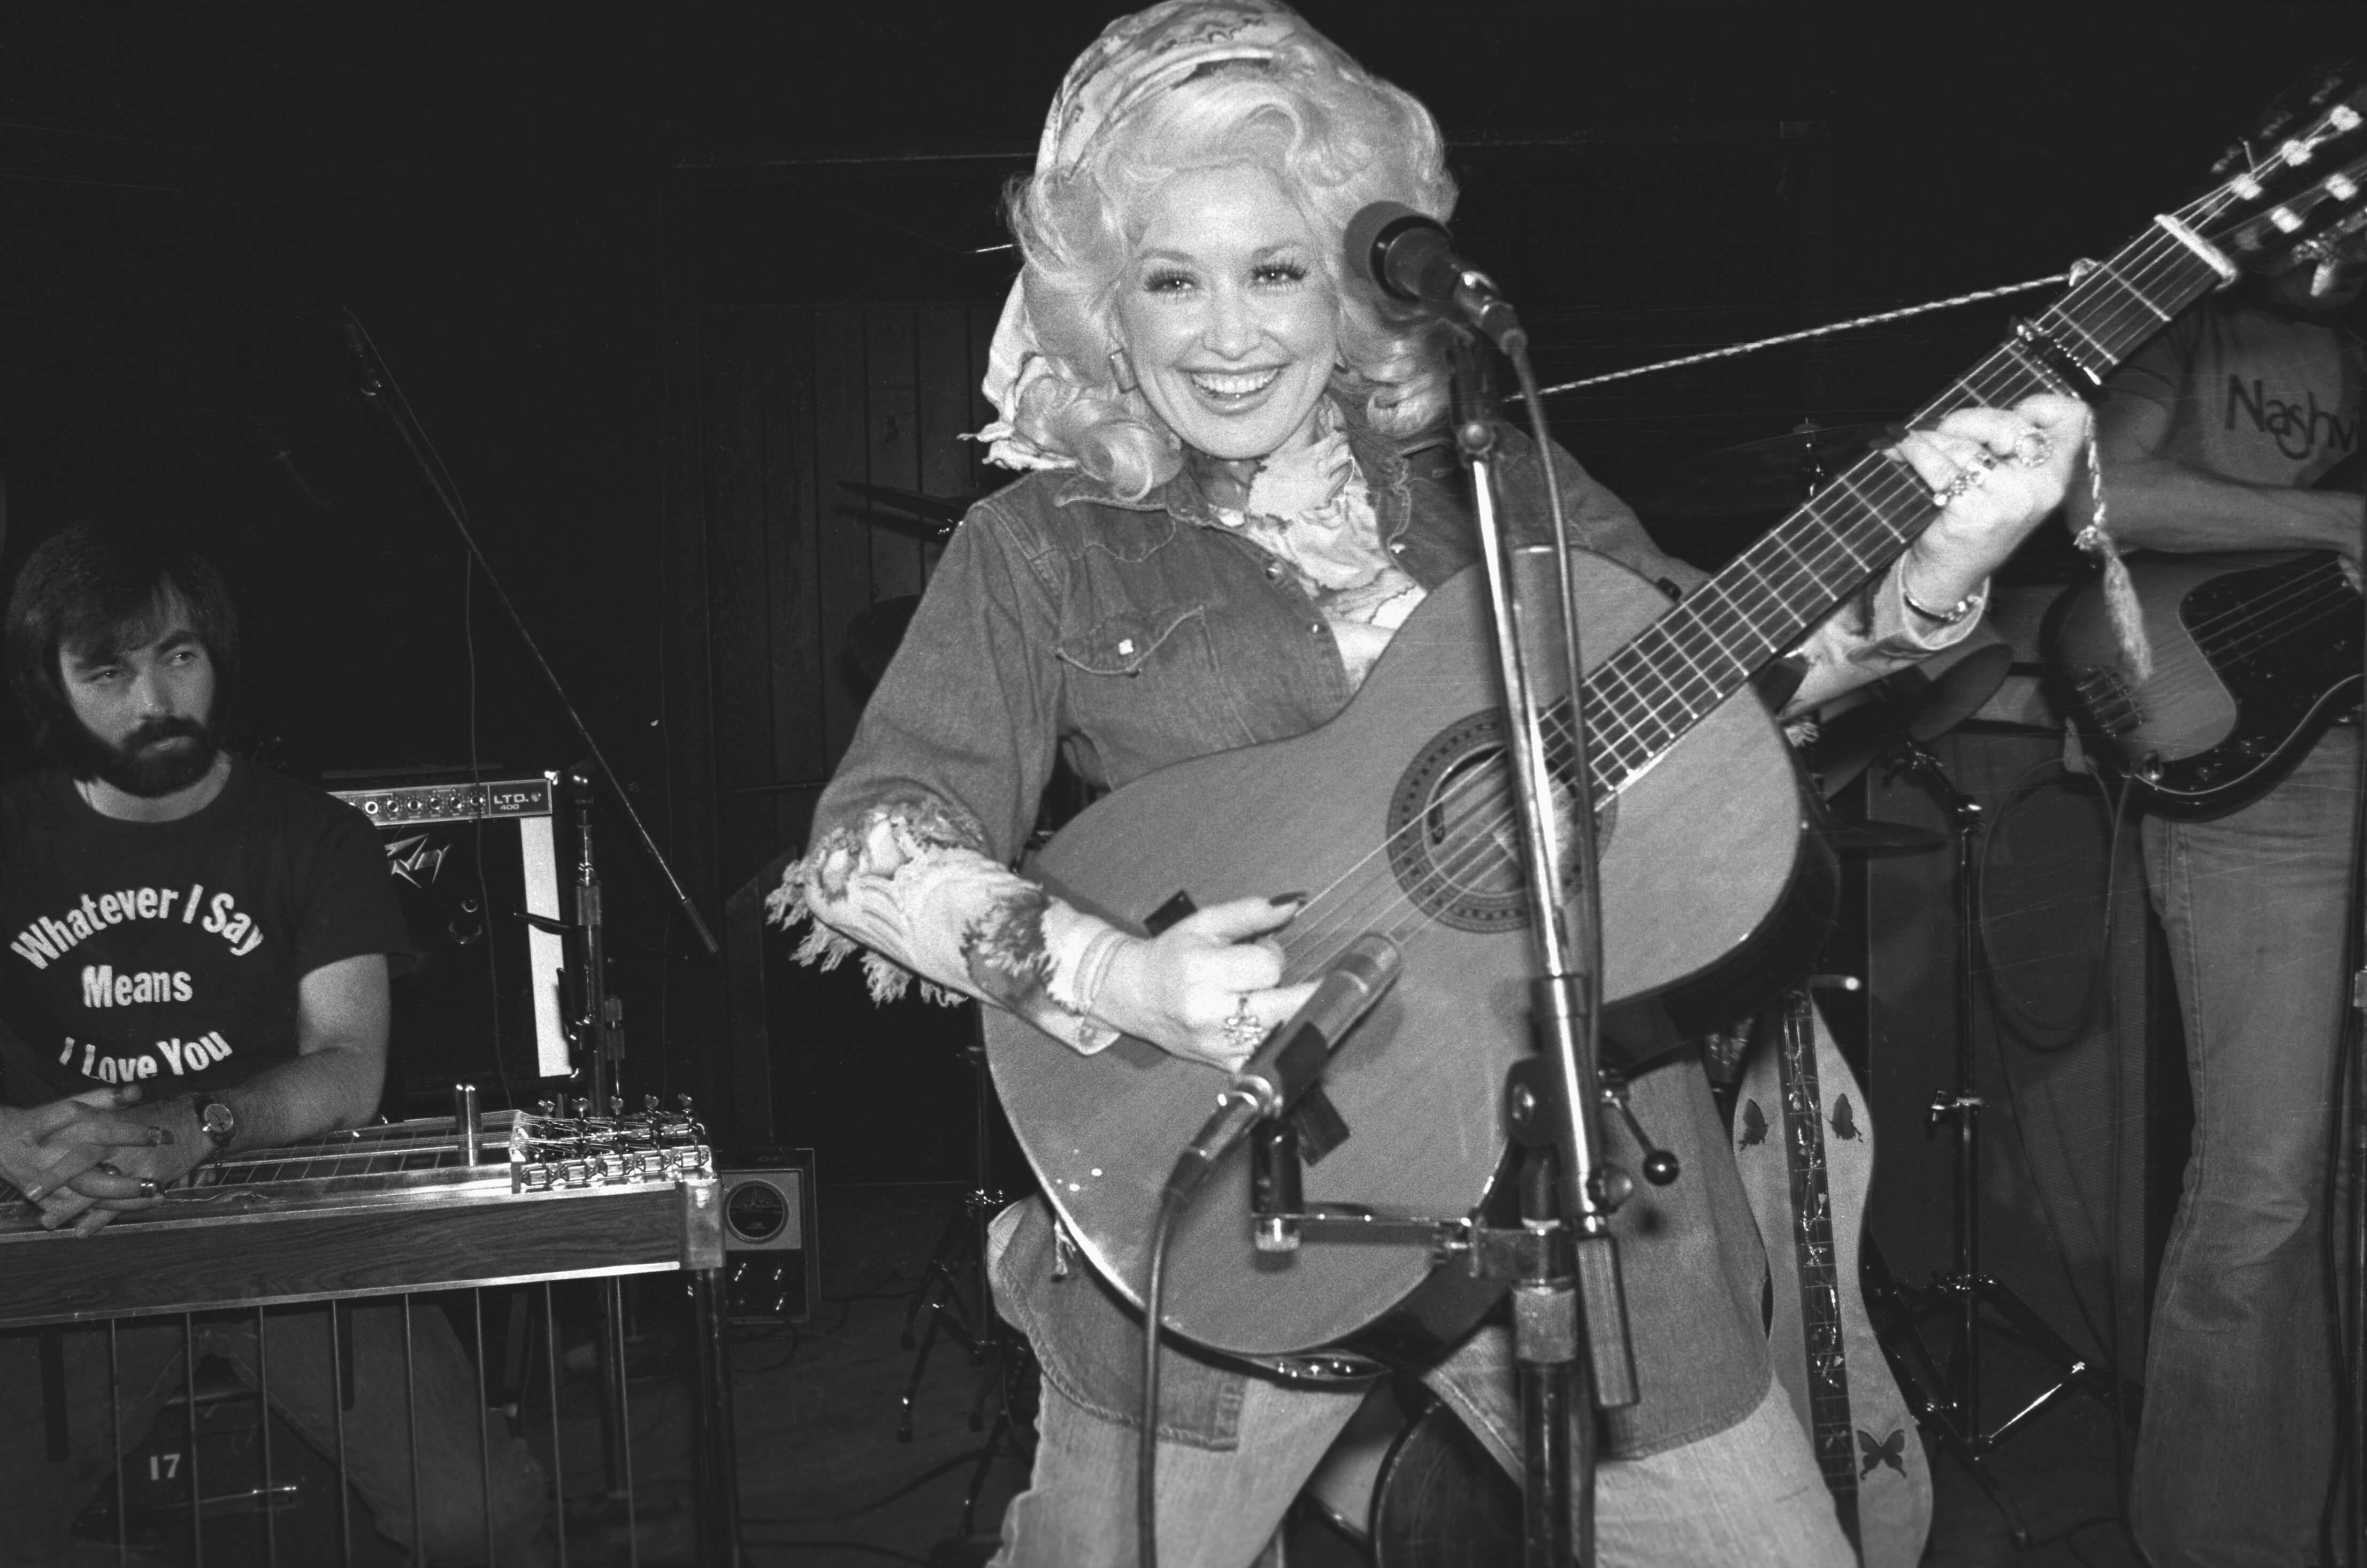 Dolly Parton shot in black and white, playing guitar on stage.